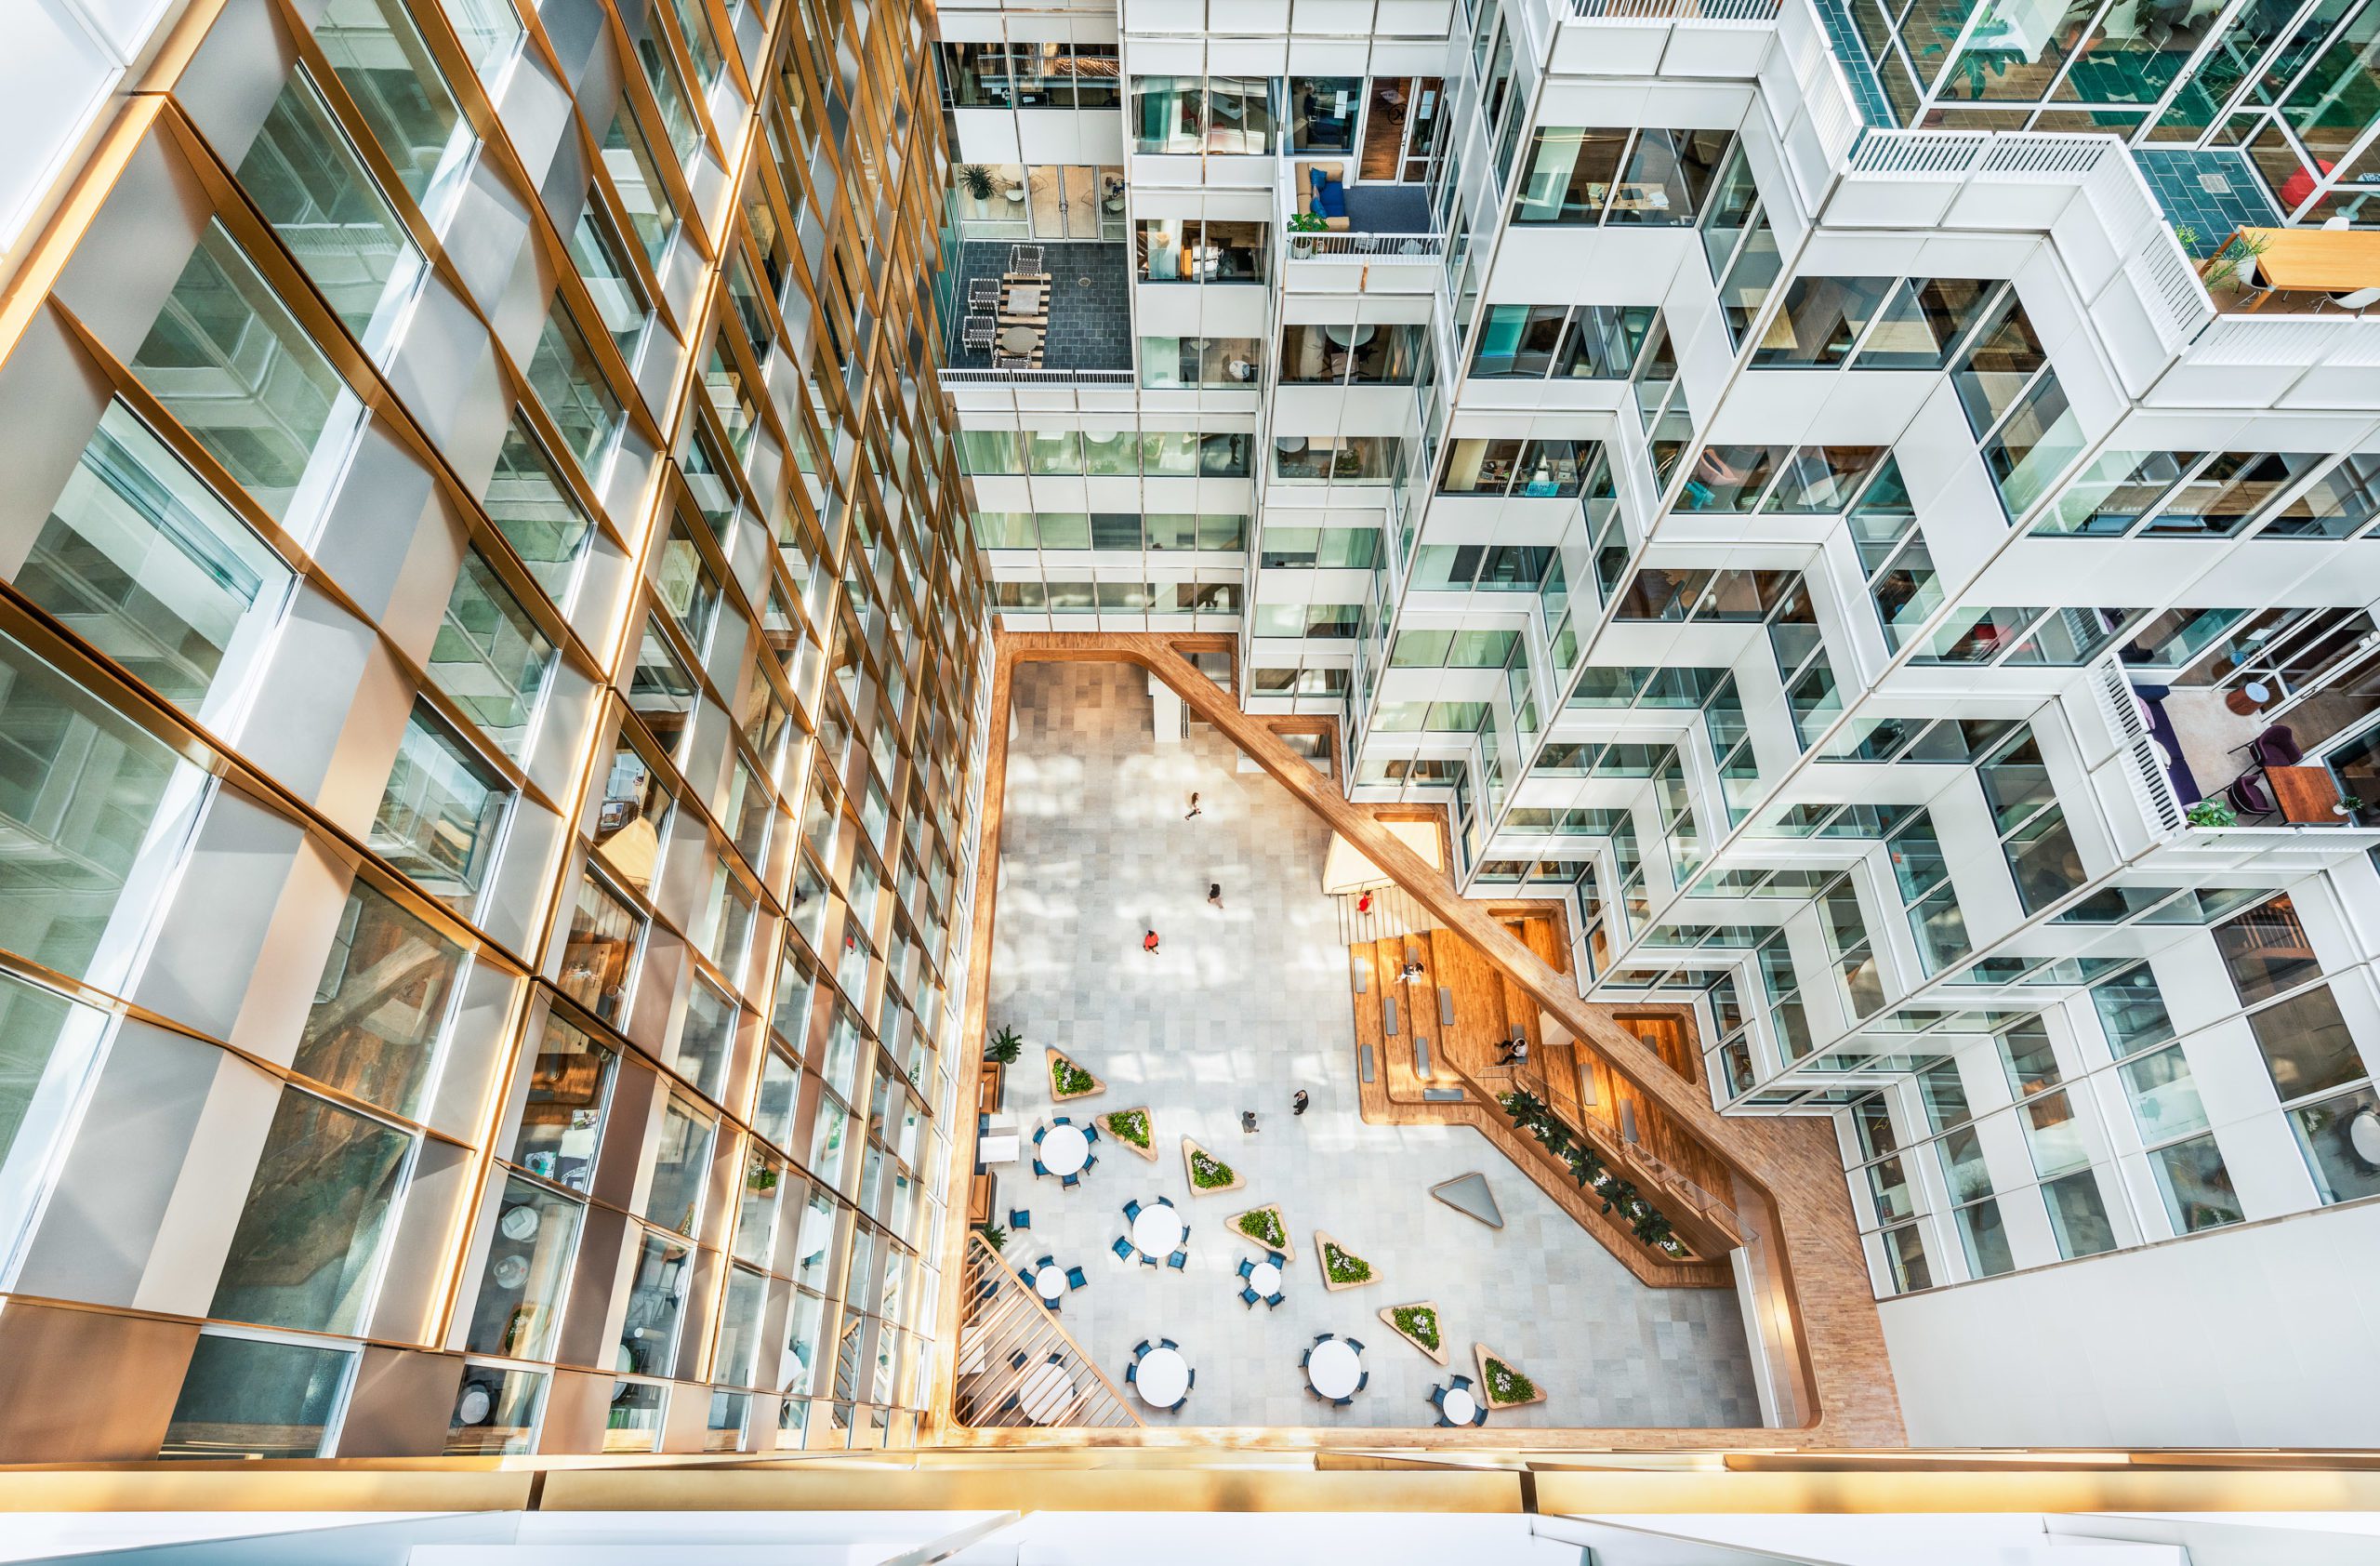 Architectural rendering looking down on the interior courtyard of Metropolitan Square